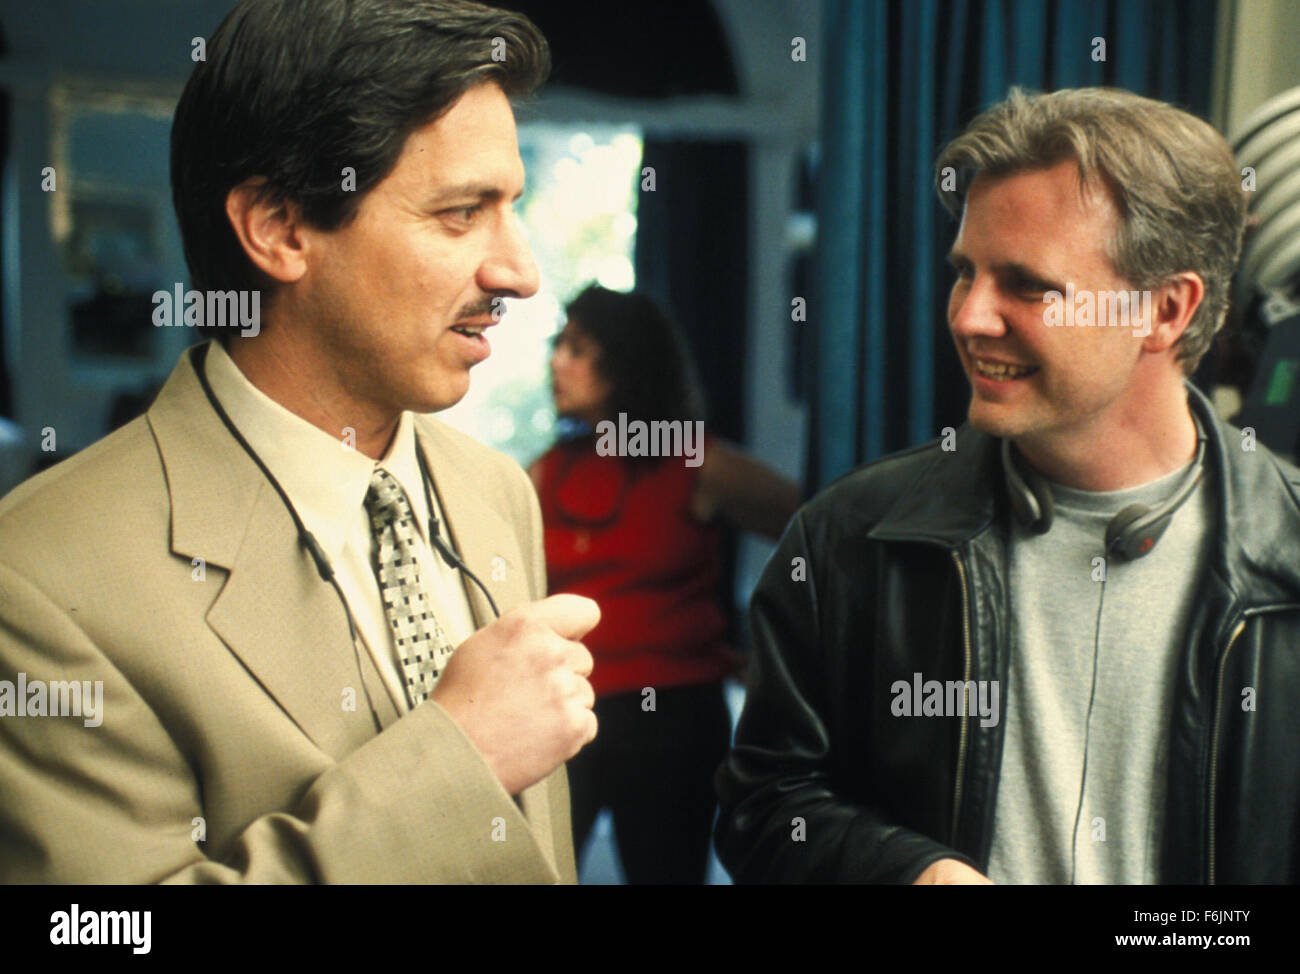 RELEASE DATE: October 15, 2004. MOVIE TITLE: Eulogy. STUDIO: Eulogy Productions LLC. PLOT: A black comedy that follows three generations of a family, who come together for the funeral of the patriarch - unveiling a litany of family secrets and covert relationships. PICTURED: RAY ROMANO and Director MICHAEL CLANCY on set. Stock Photo